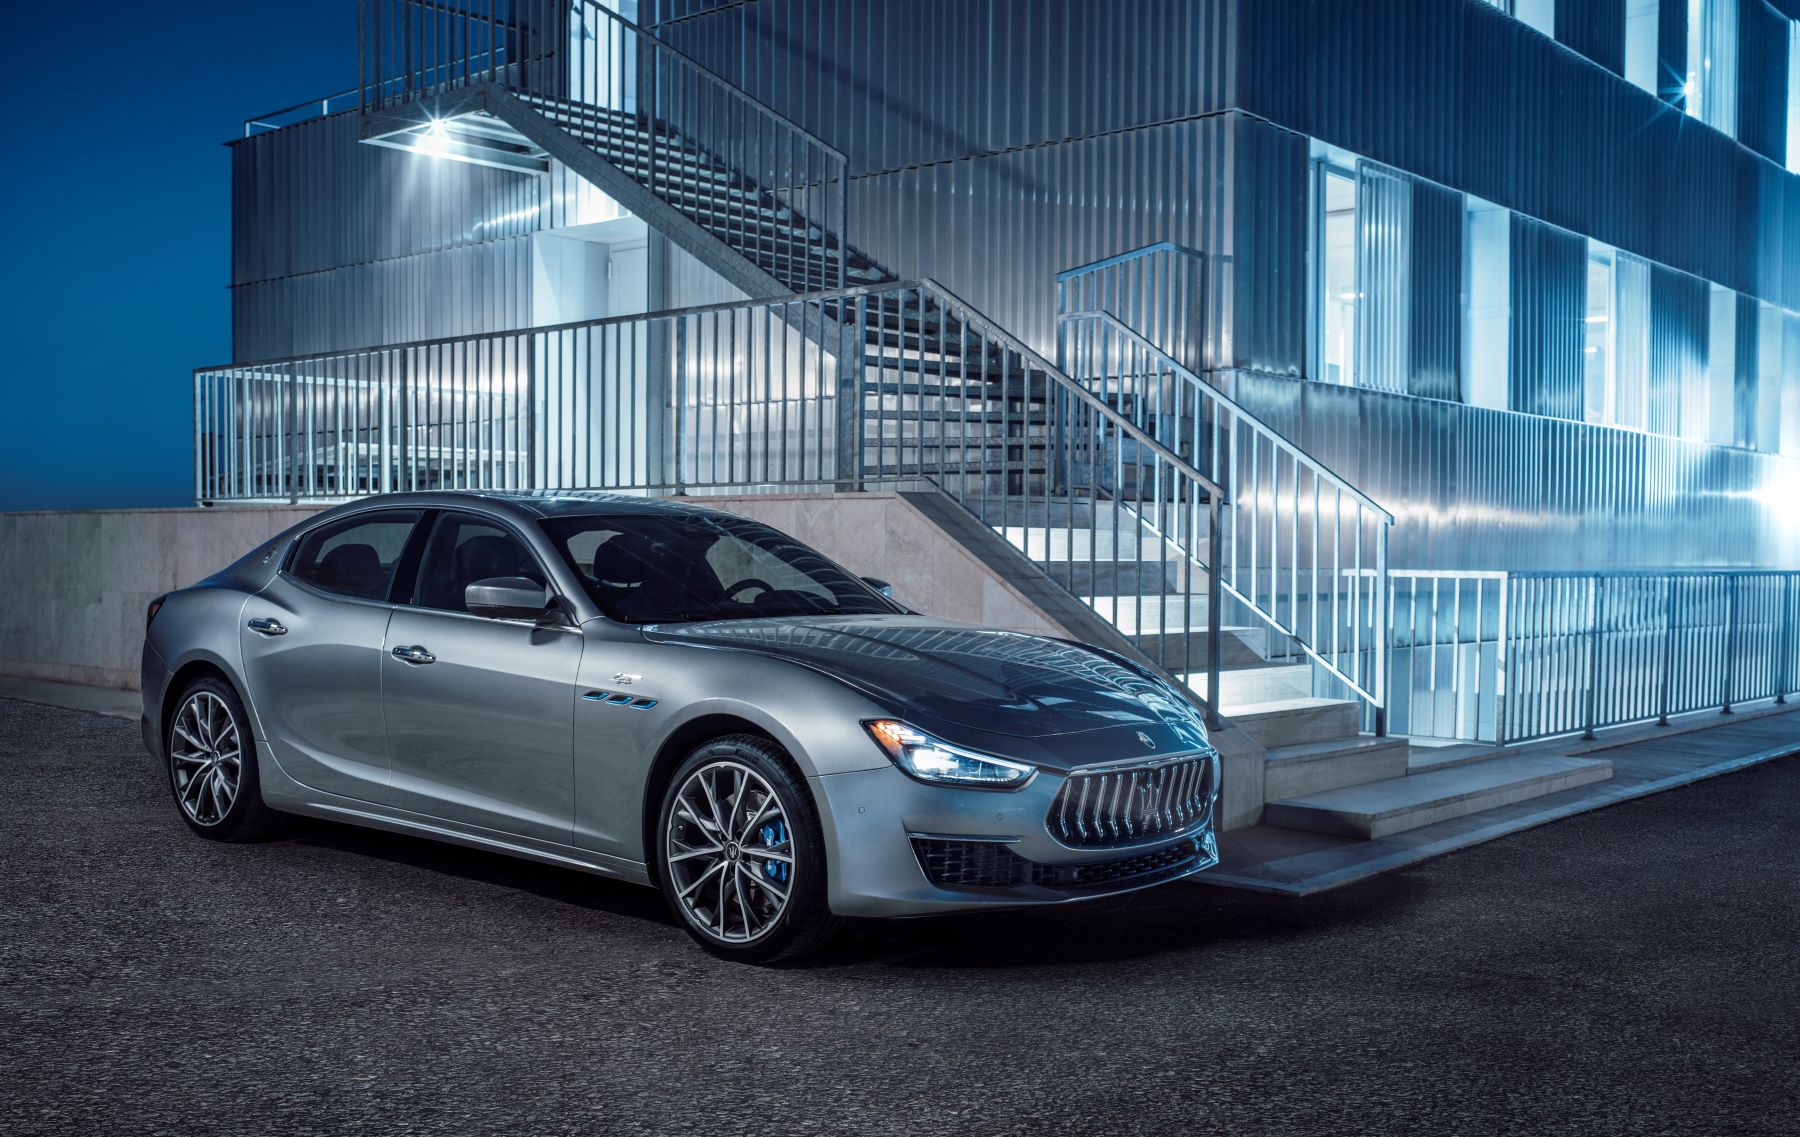 A gray 2022 Maserati Ghibli GT executive car/luxury sedan parked next to metal stairs and fencing at night